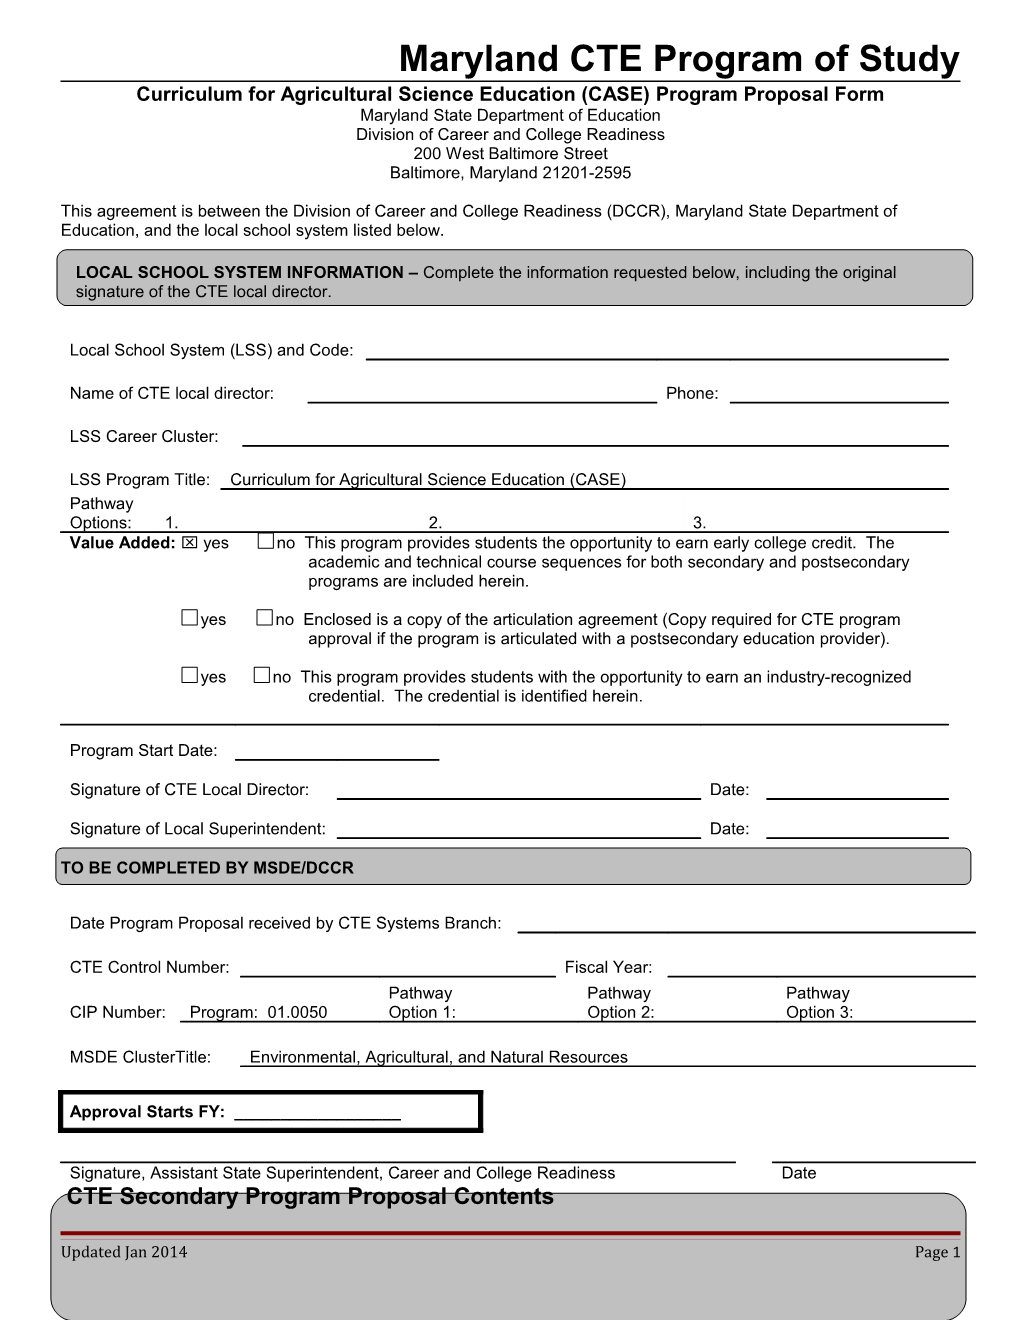 Curriculum for Agricultural Science Education (CASE) Program Proposal Form